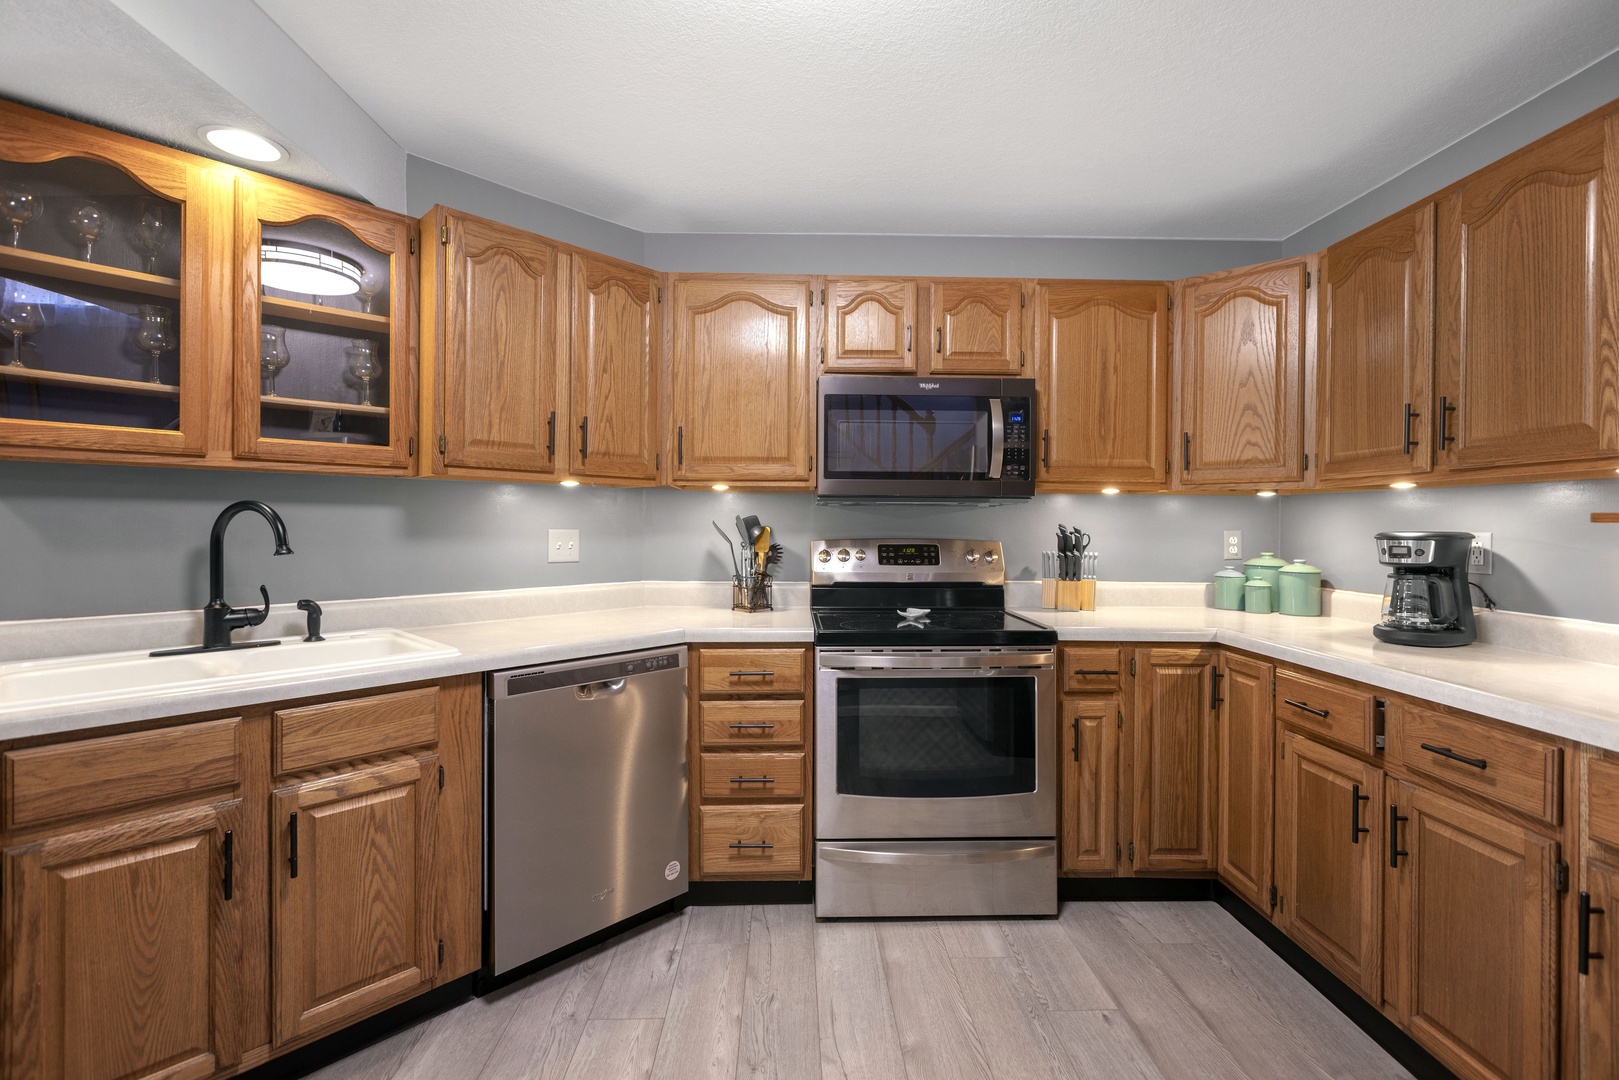 Spacious fully equipped kitchen with coffee bar